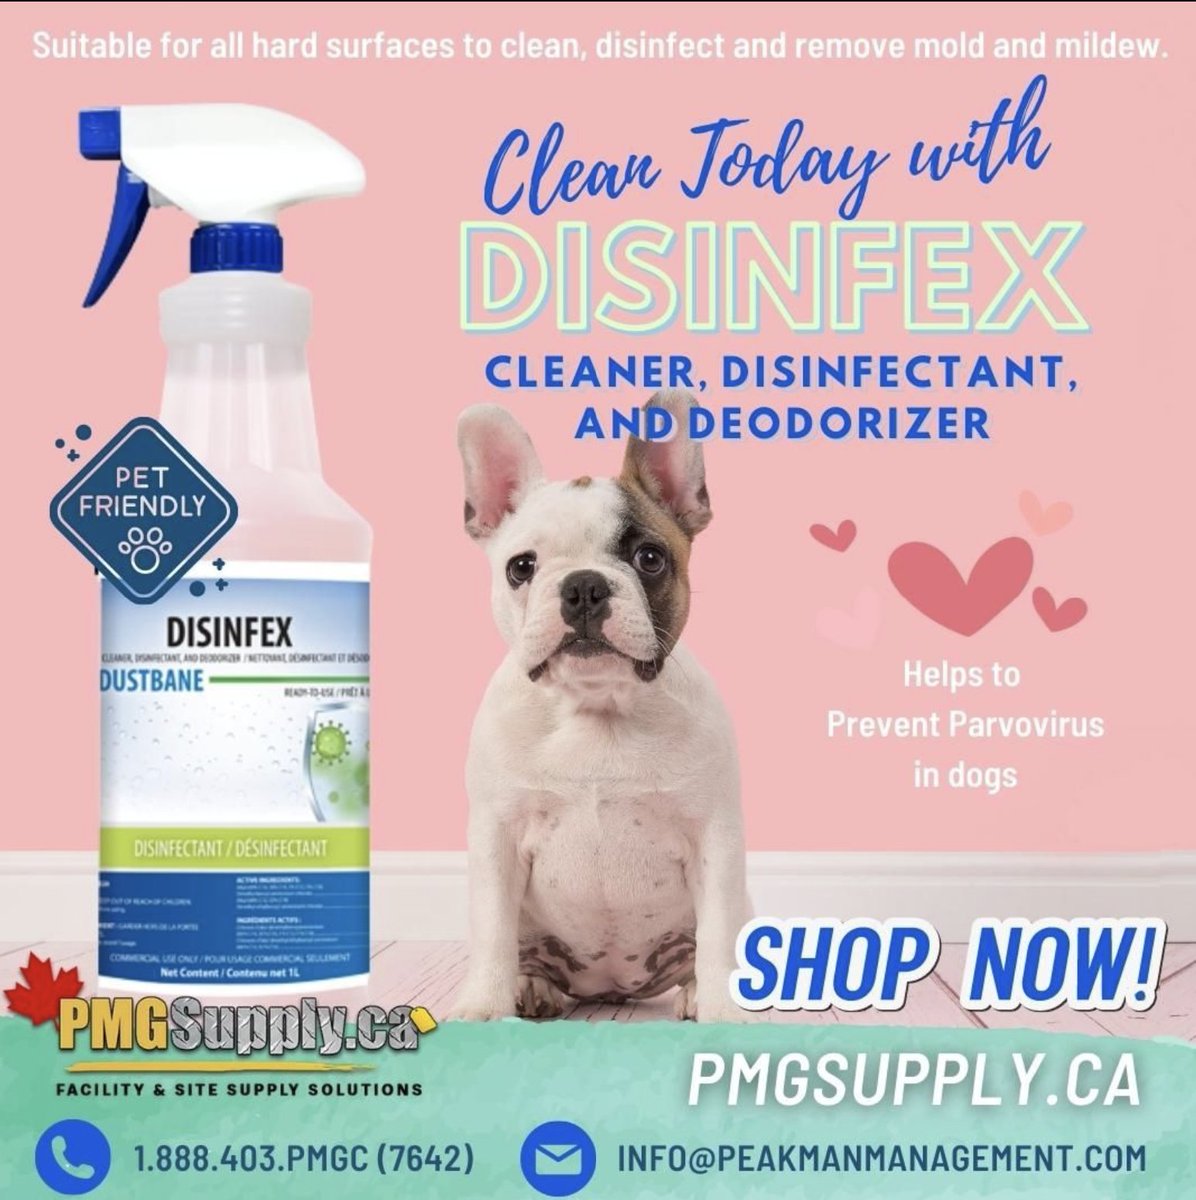 DID YOU KNOW?
PMG Supply has a product to prevent and protect your canine family members from Parvo. 
Disinfex – RTU Disinfectant. Complete disinfection in just 5 minutes. 

🛒pmgsupply.ca/product/disinf…

#caninefamily #parvo #disinfex #protection #prevention #pmgsupply #peakman